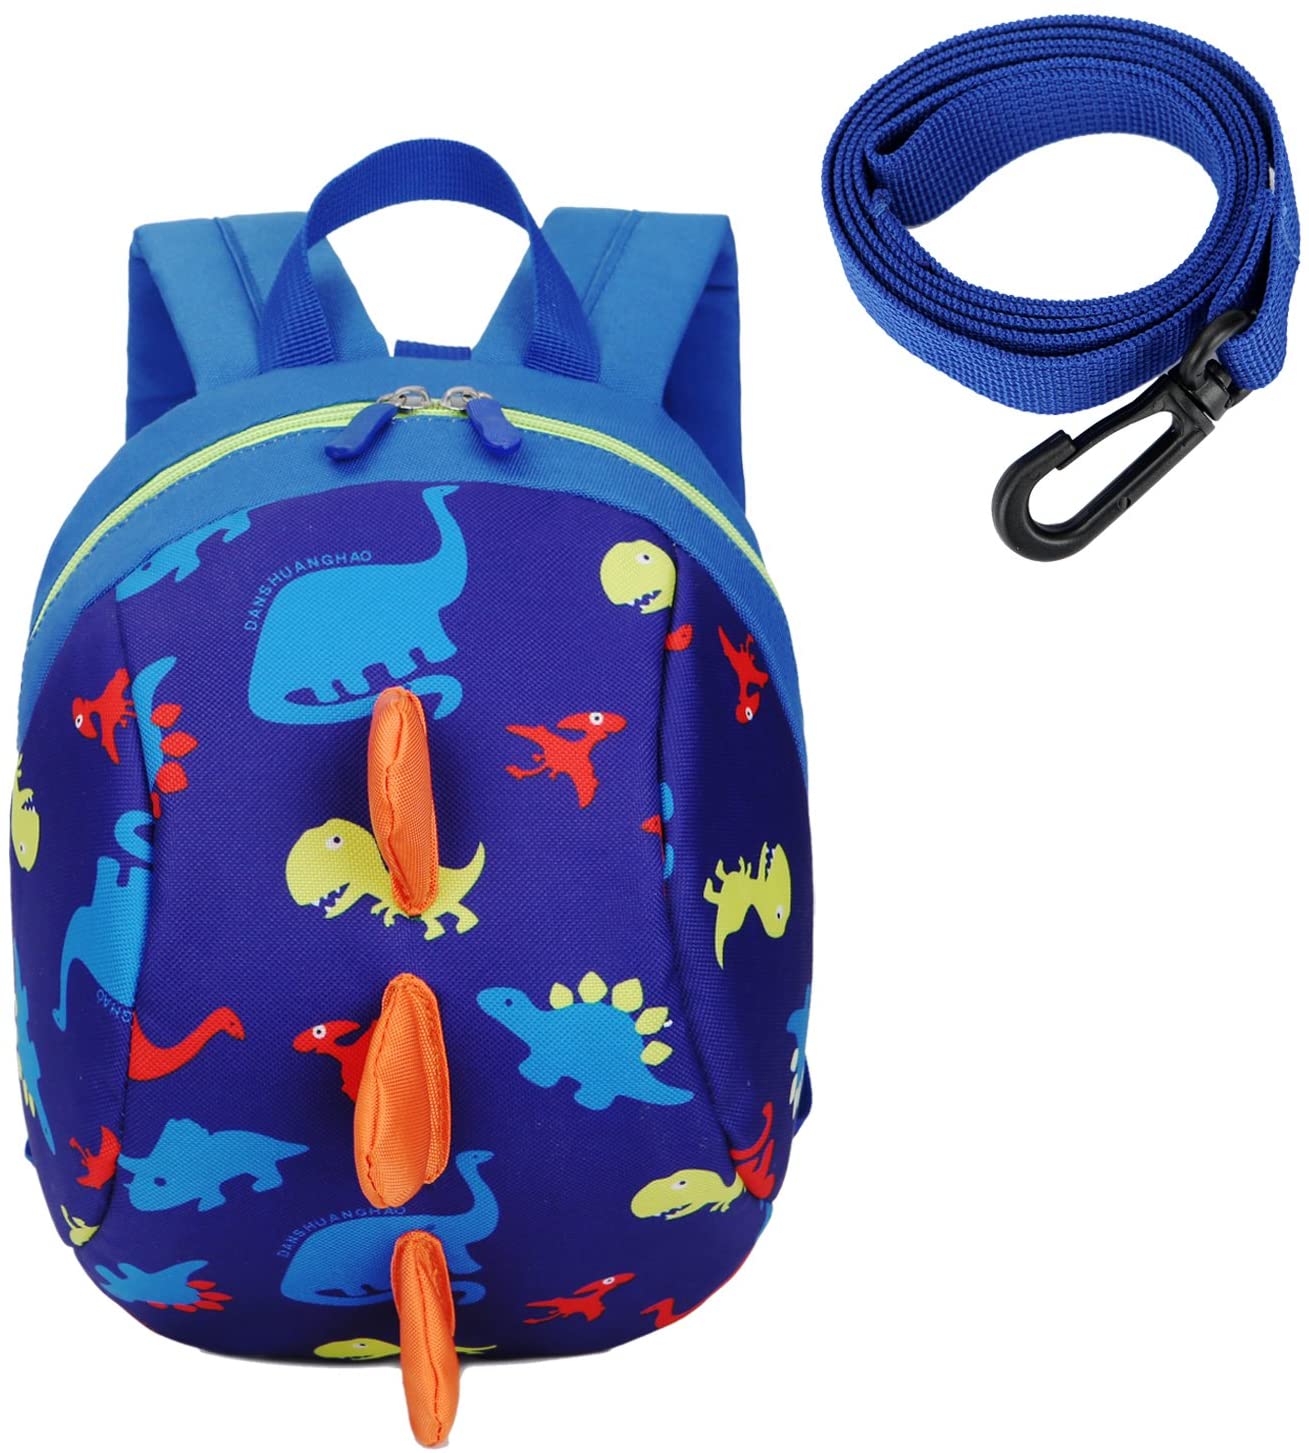 Cosyres Toddler Dinosaur Baby Backpack with Reins, Kids Safety Harness ...